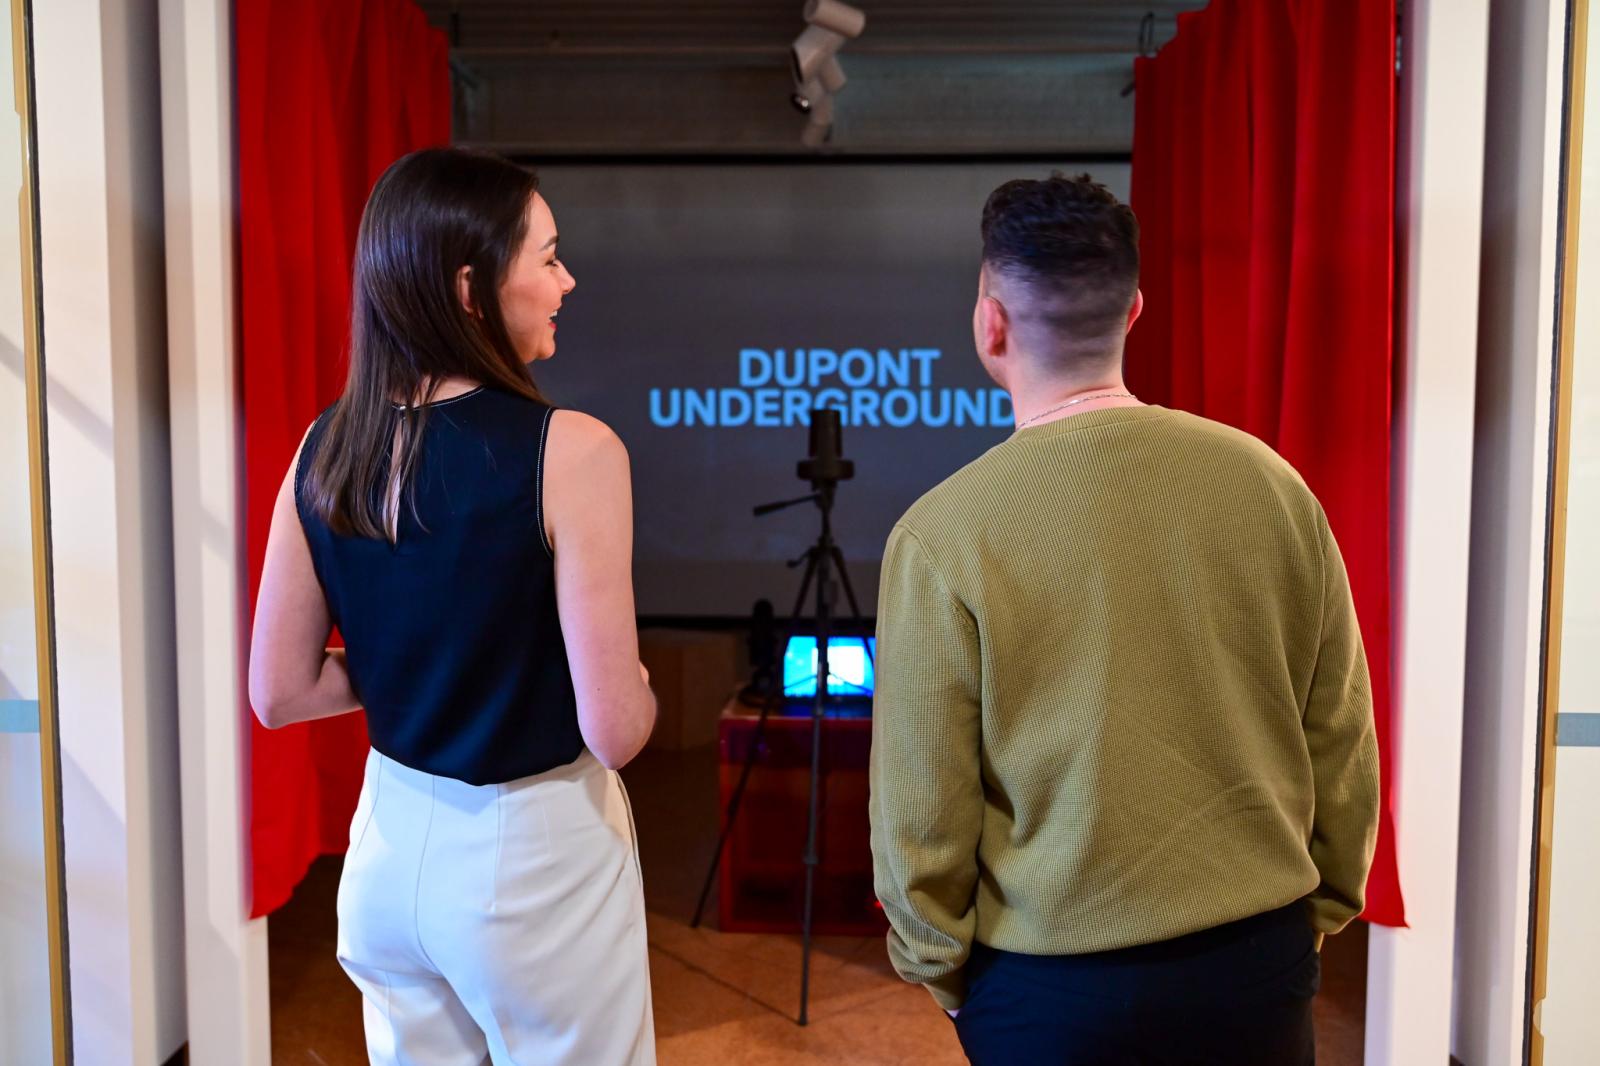 People standing in front of red curtains, a projection reads The Dupont Underground in the background